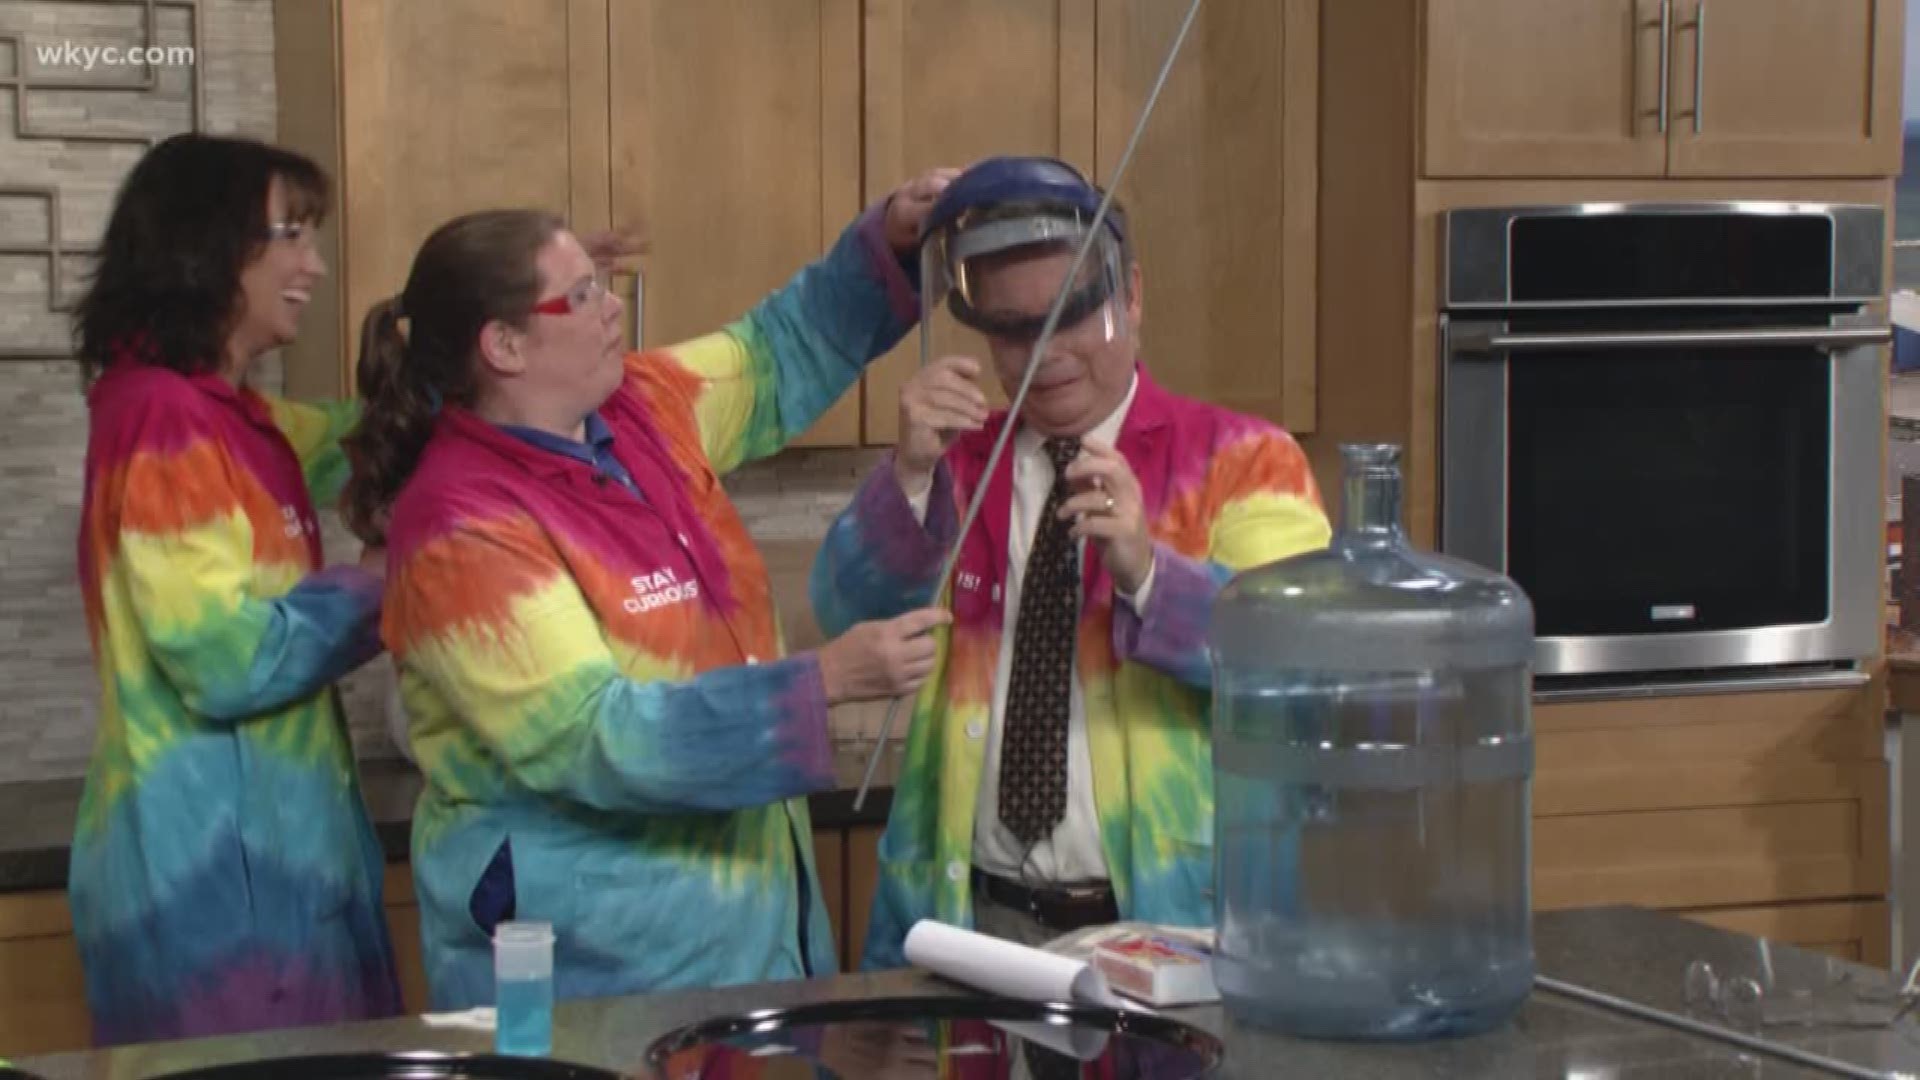 Jim Donovan and Betsy Kling learn about hydrogen as a fuel for rockets courtesy of the Great Lakes Science Center